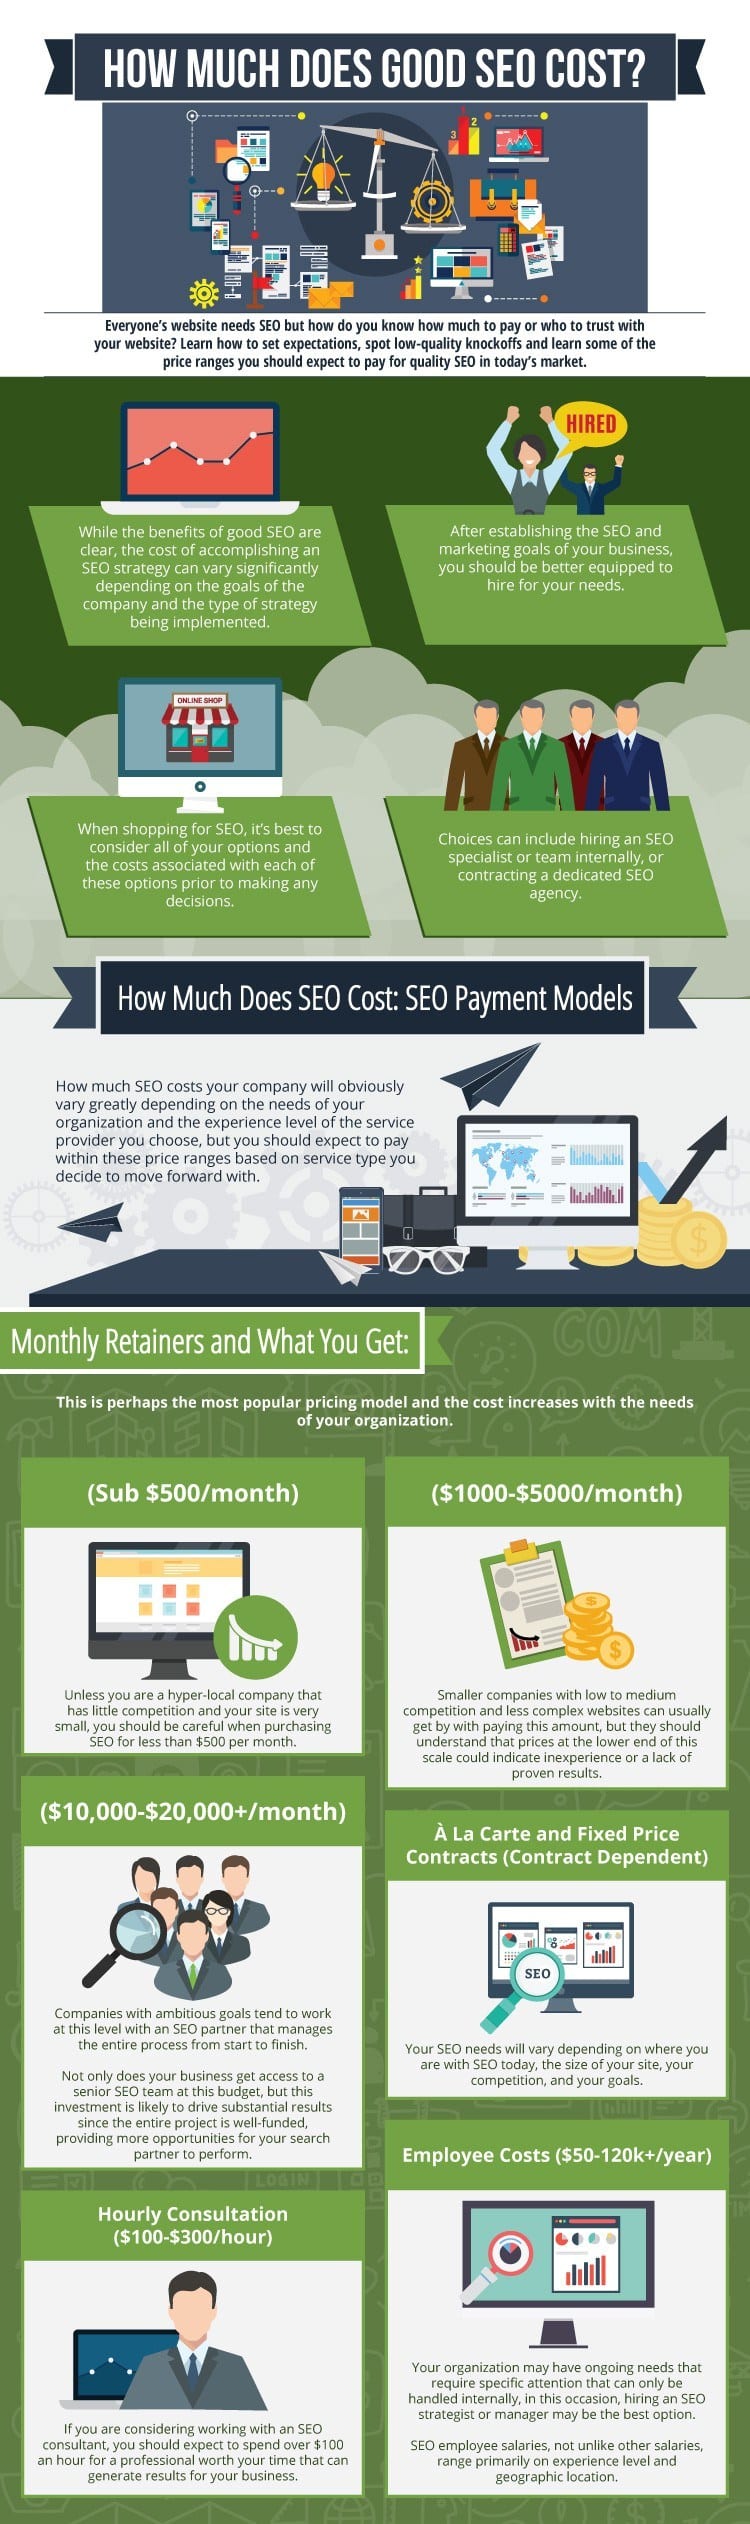 Seo cost and pricing infographic